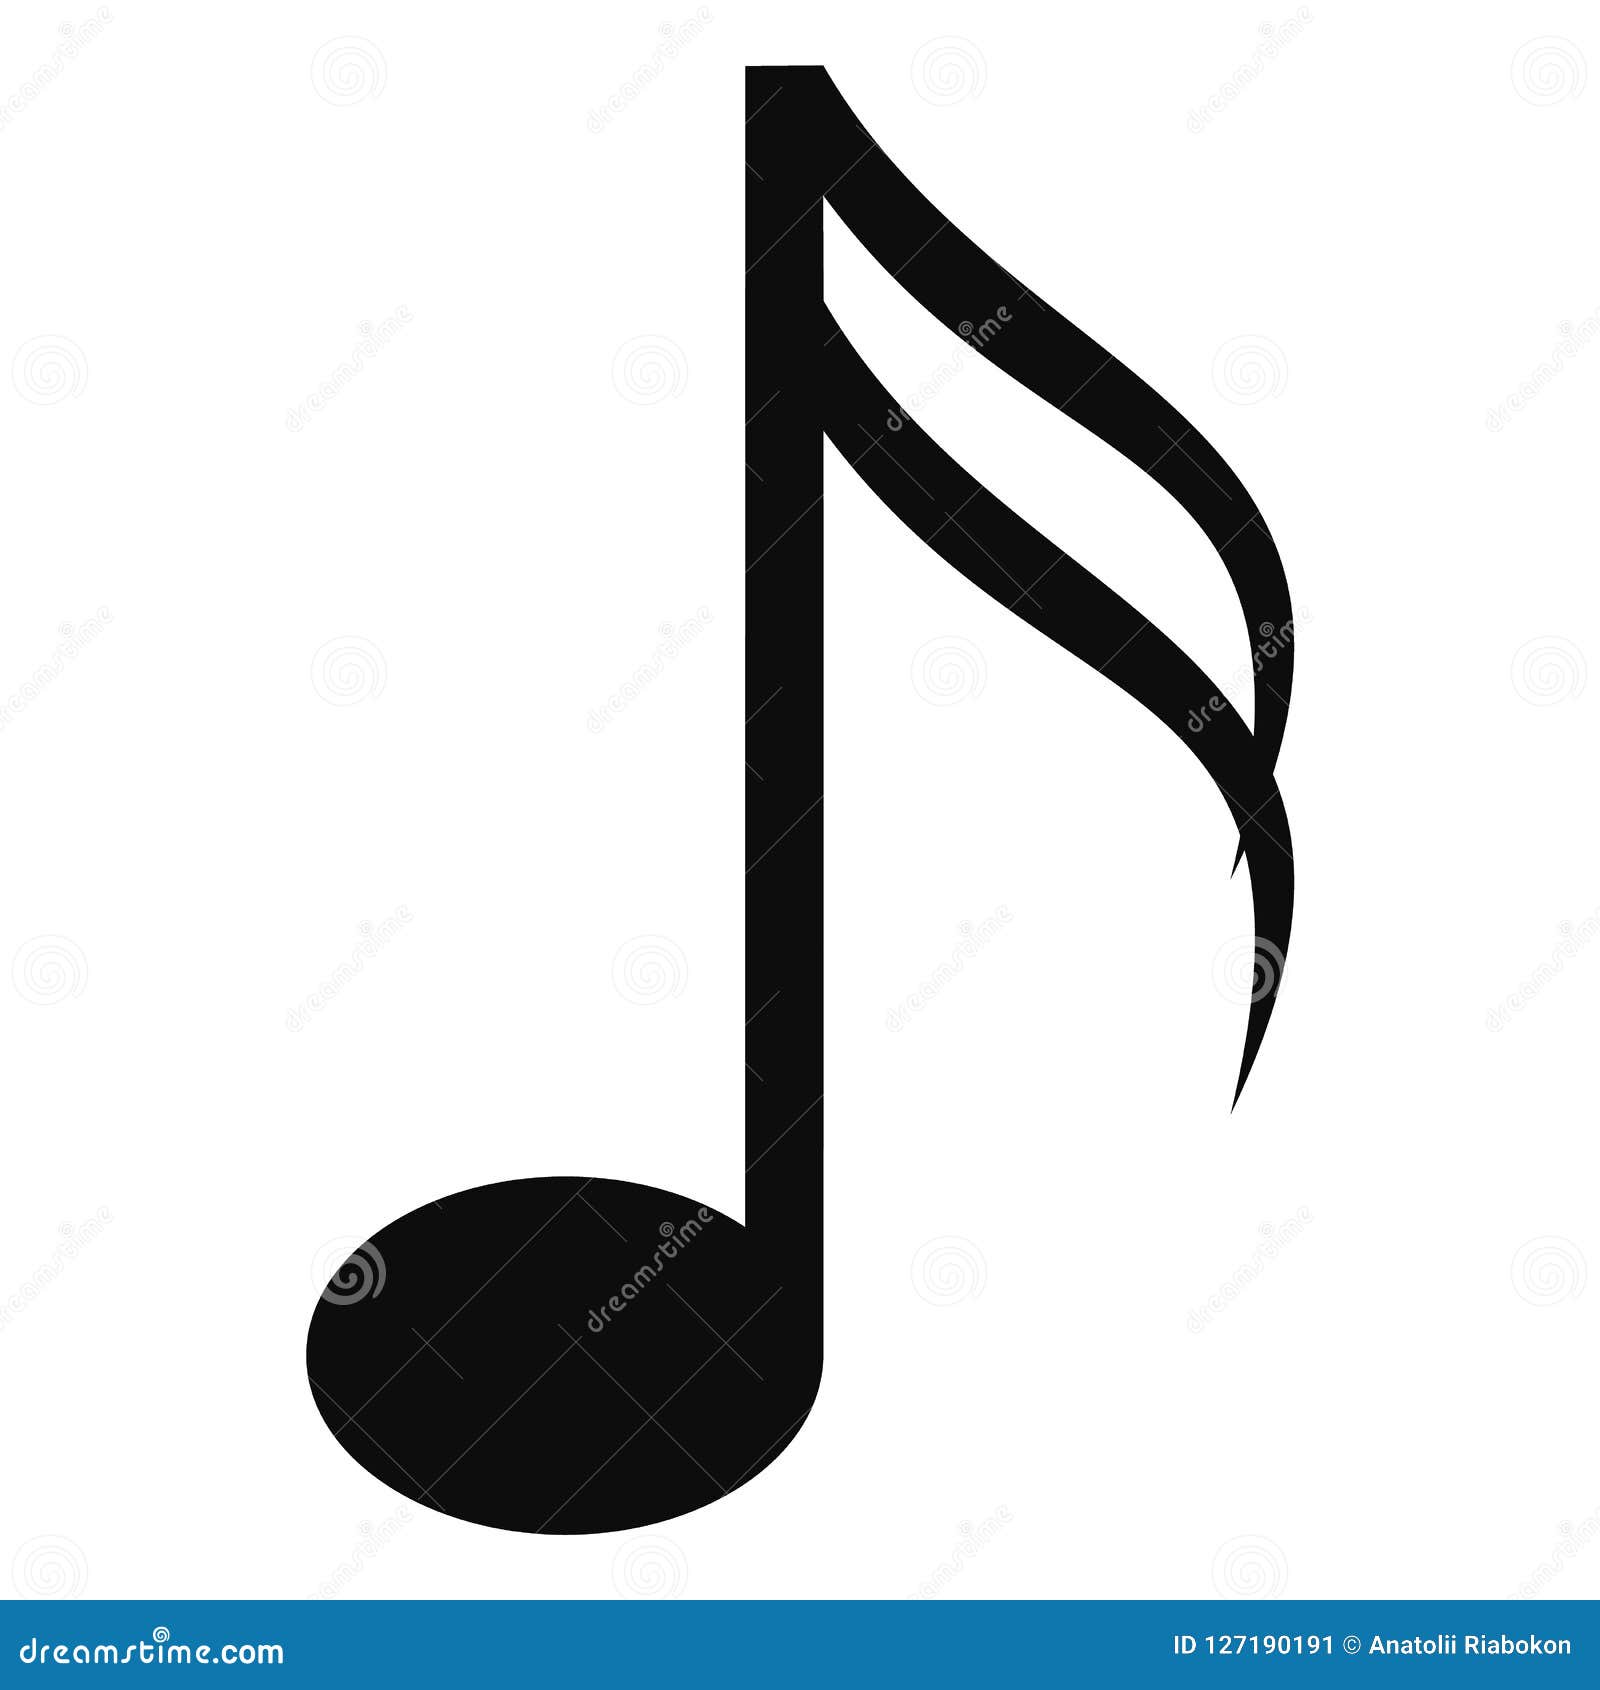 sixteenth music note icon, simple style